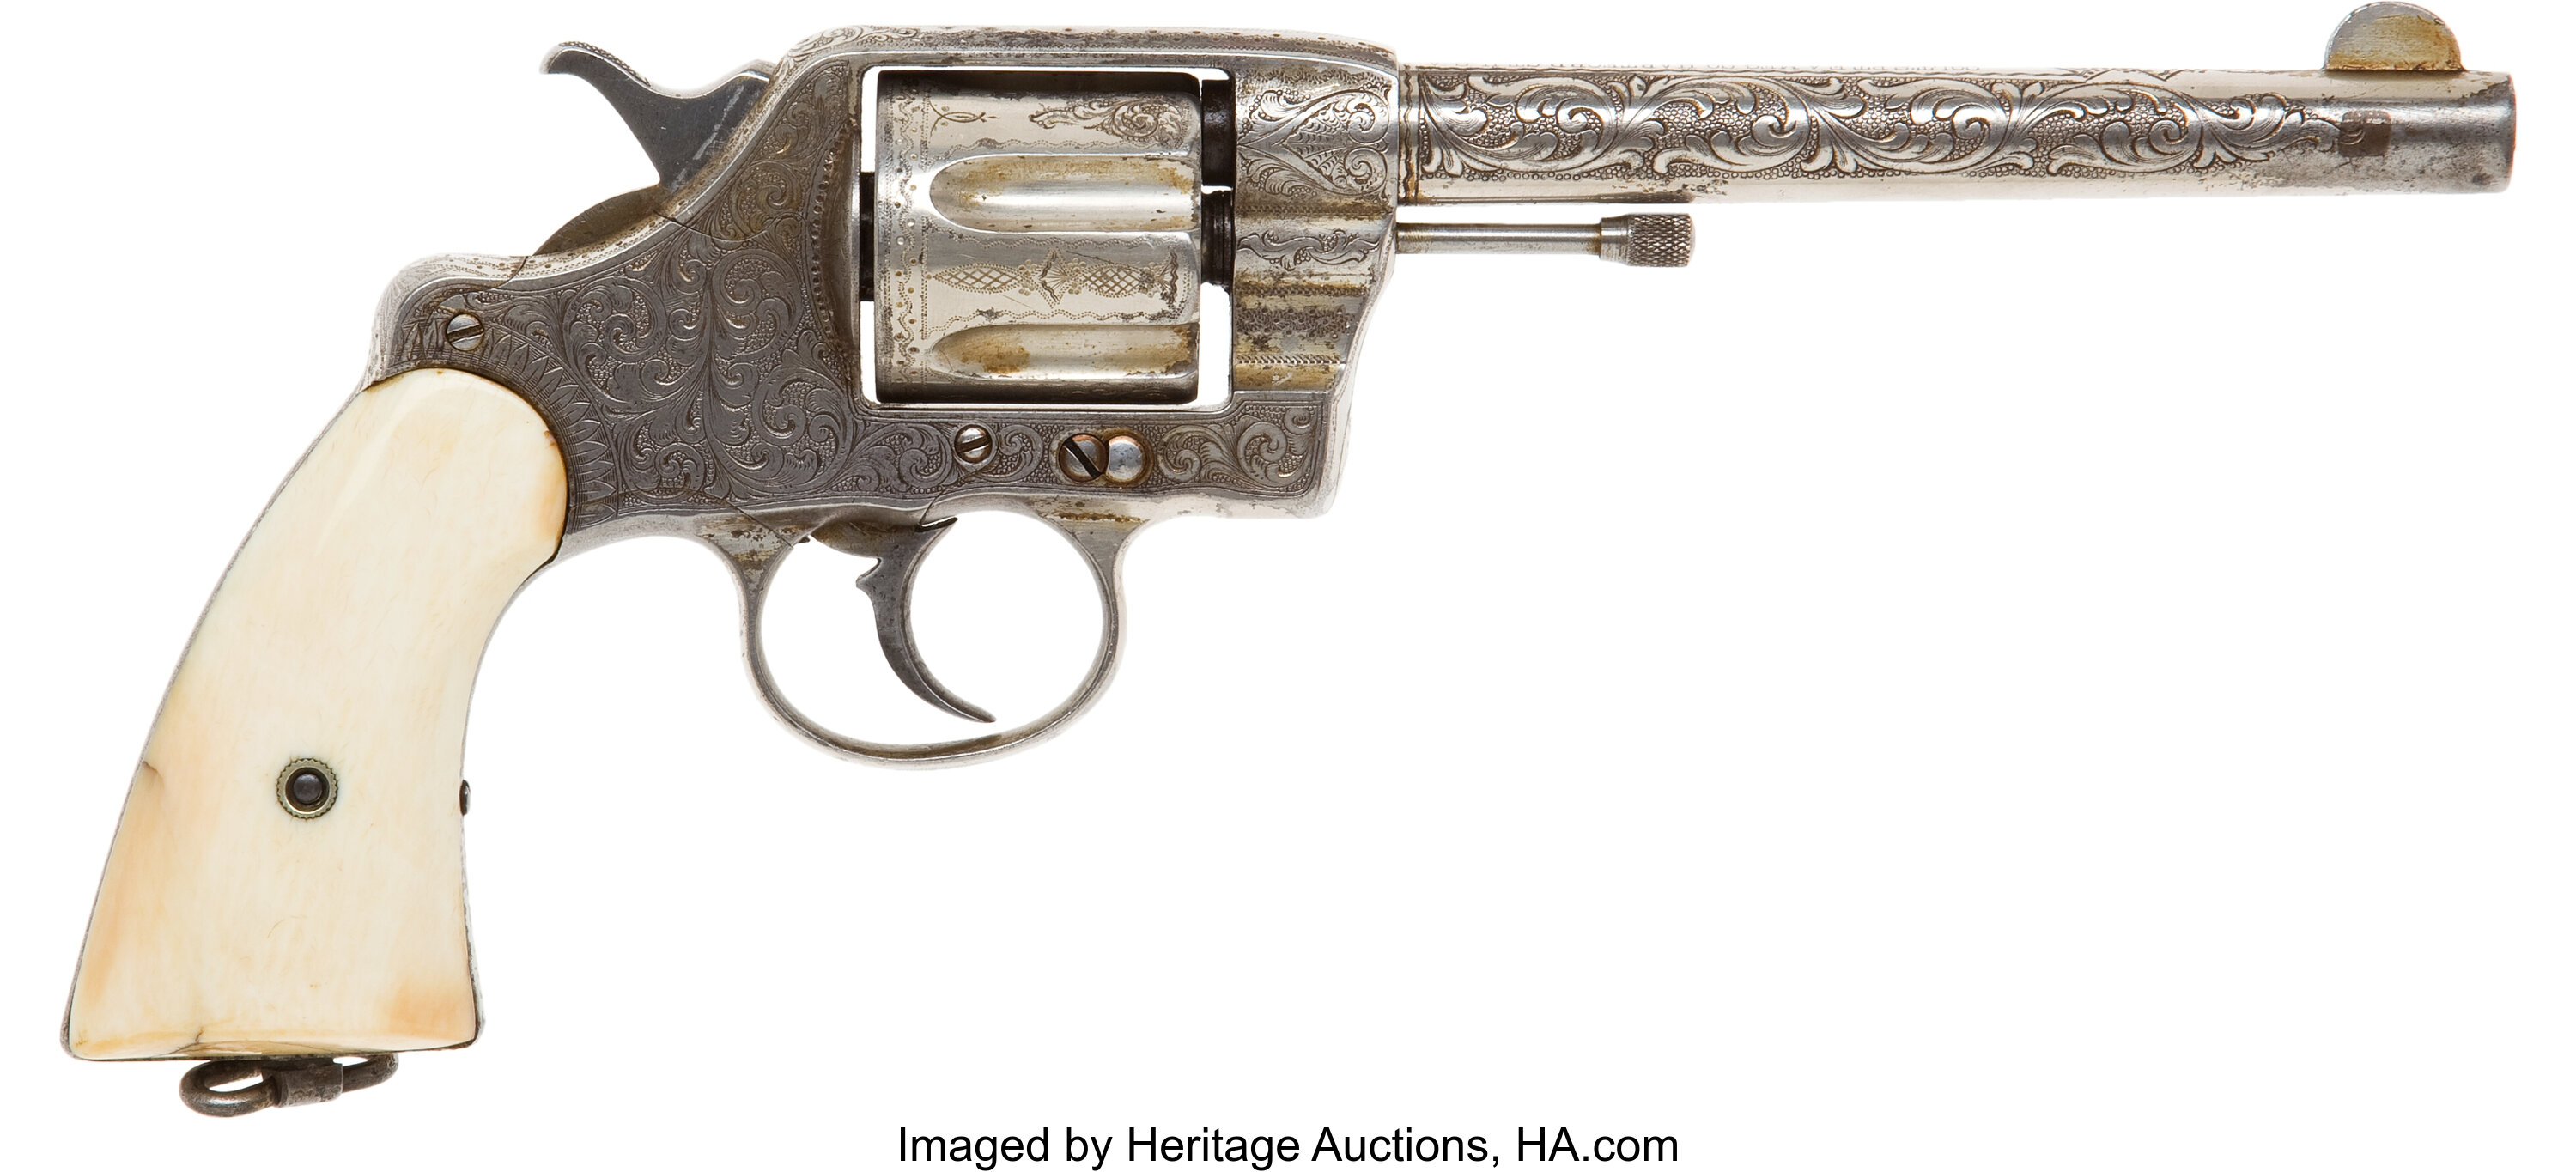 Engraved Colt Model 1892 Double Action Revolver with Ivory Grips. | Lot  #50700 | Heritage Auctions